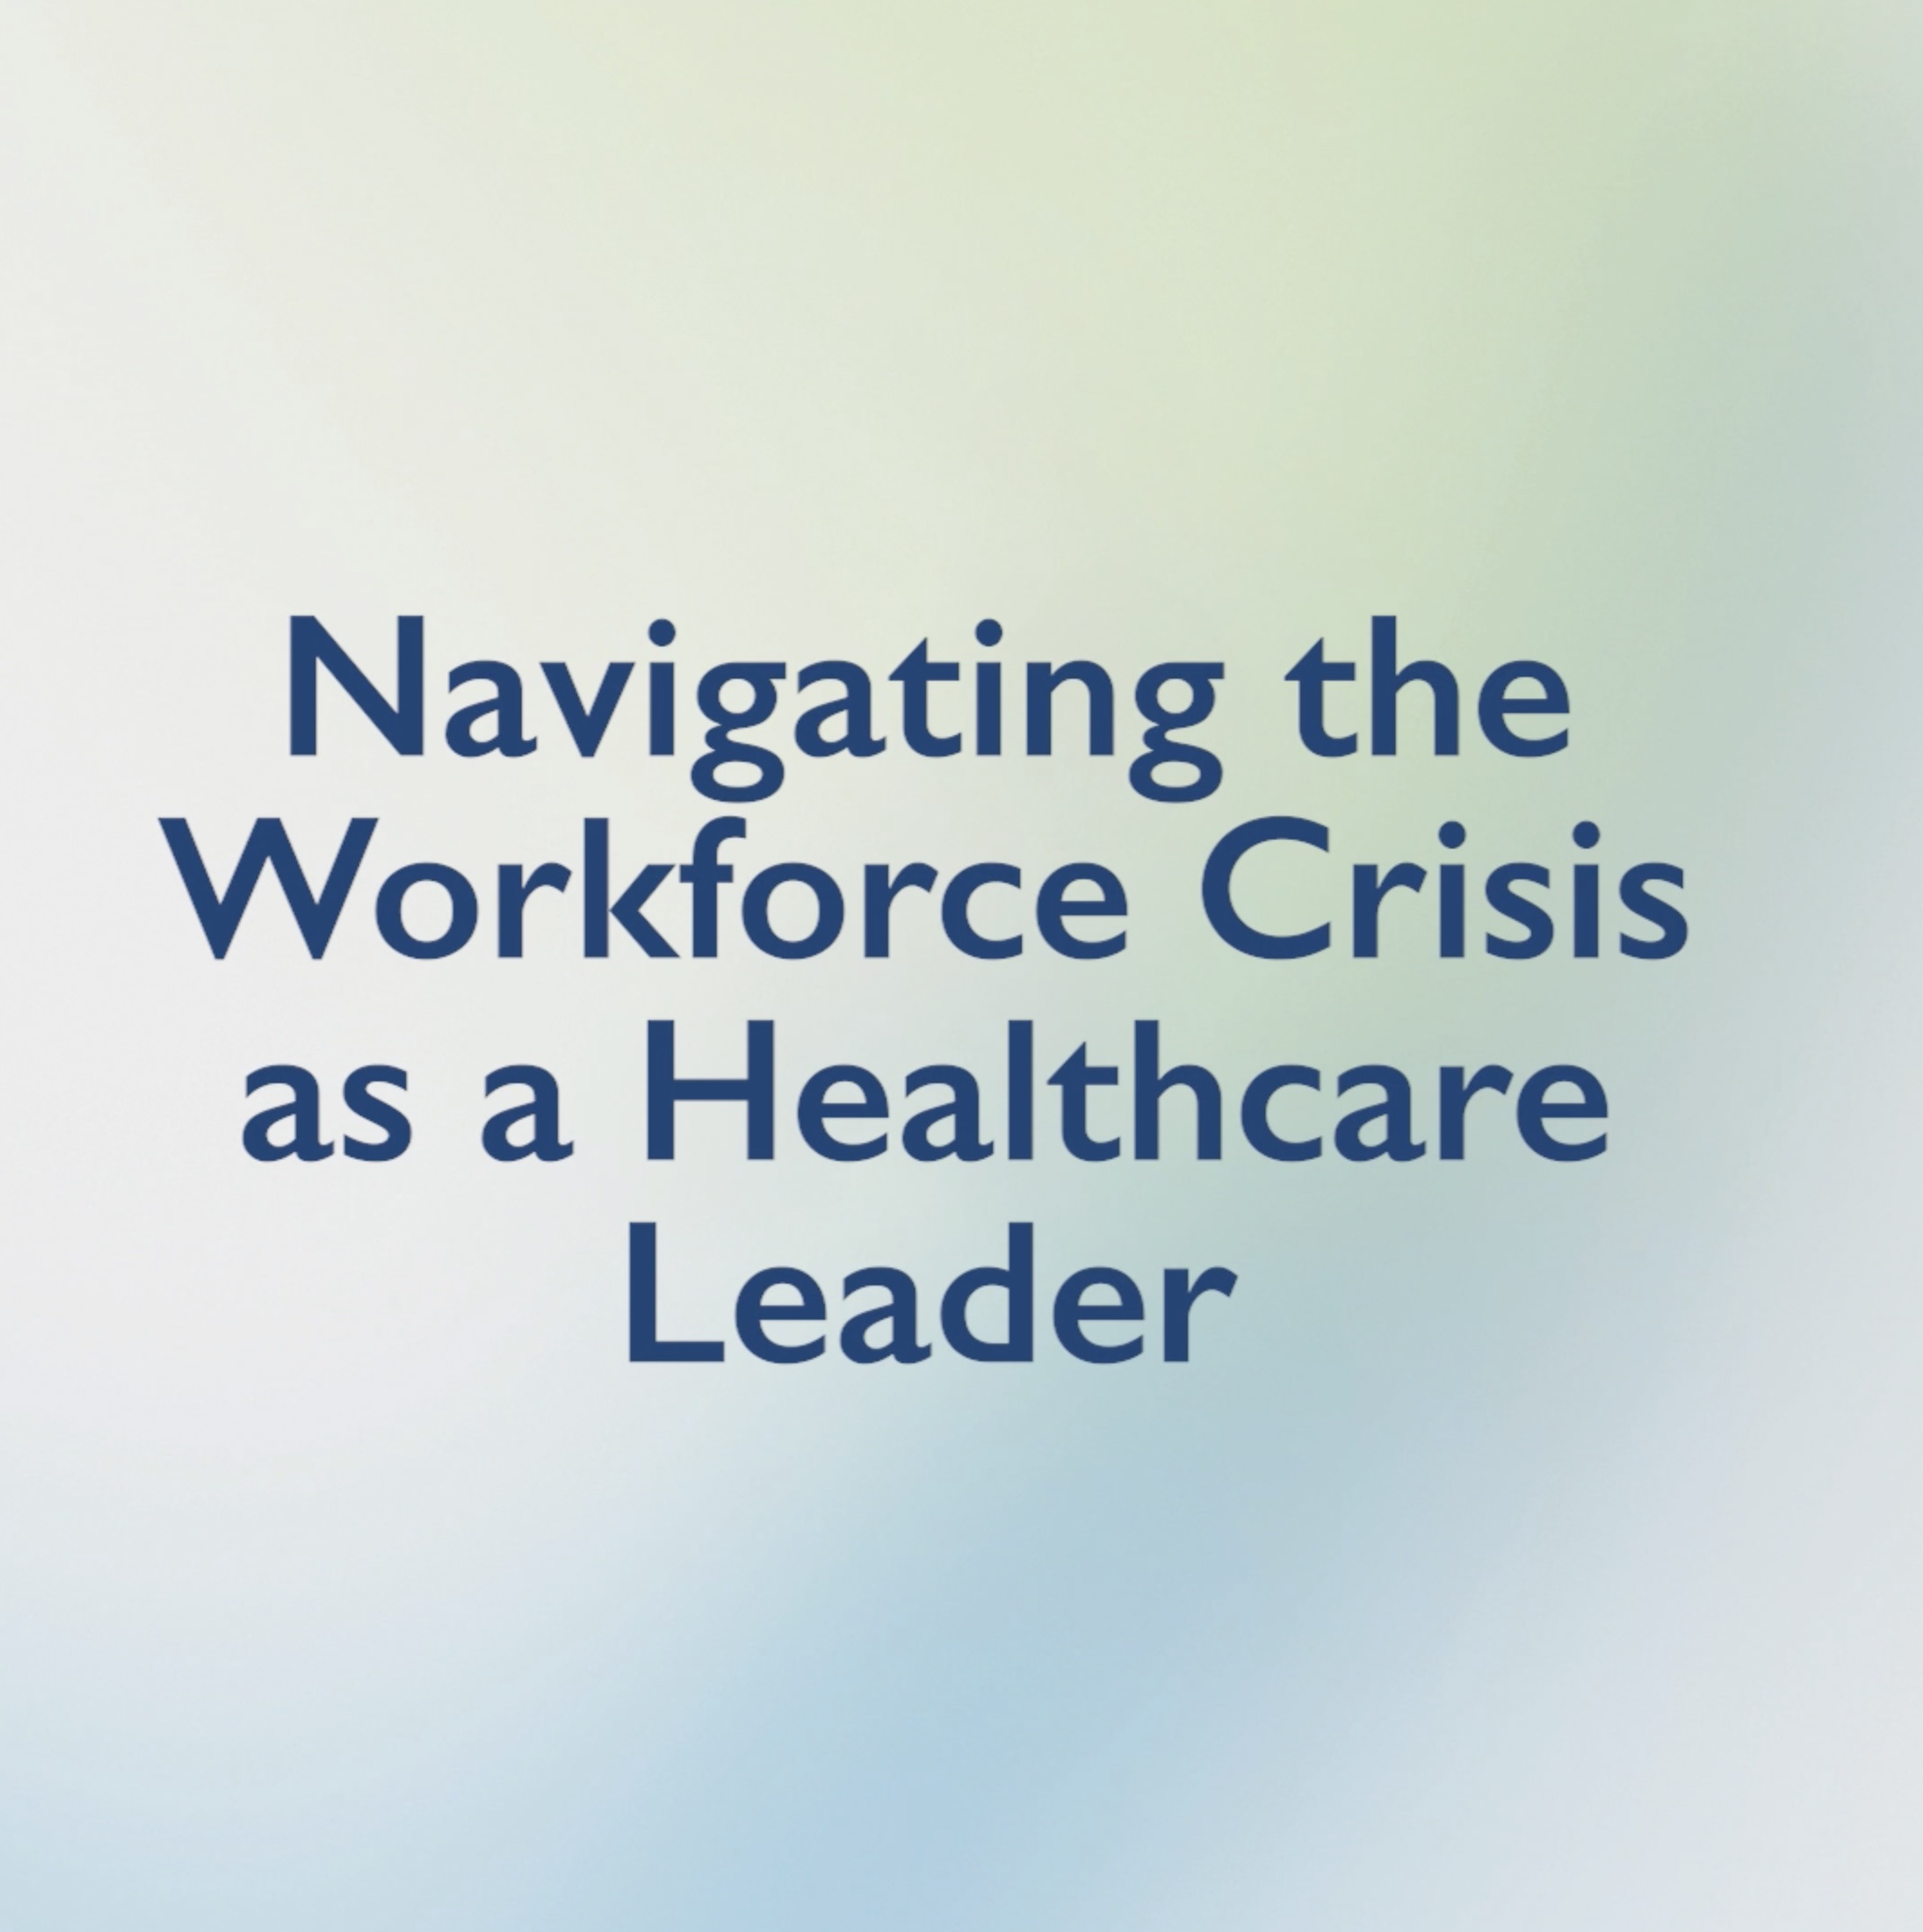 Navigating the Workforce Crisis as a Healthcare Leader